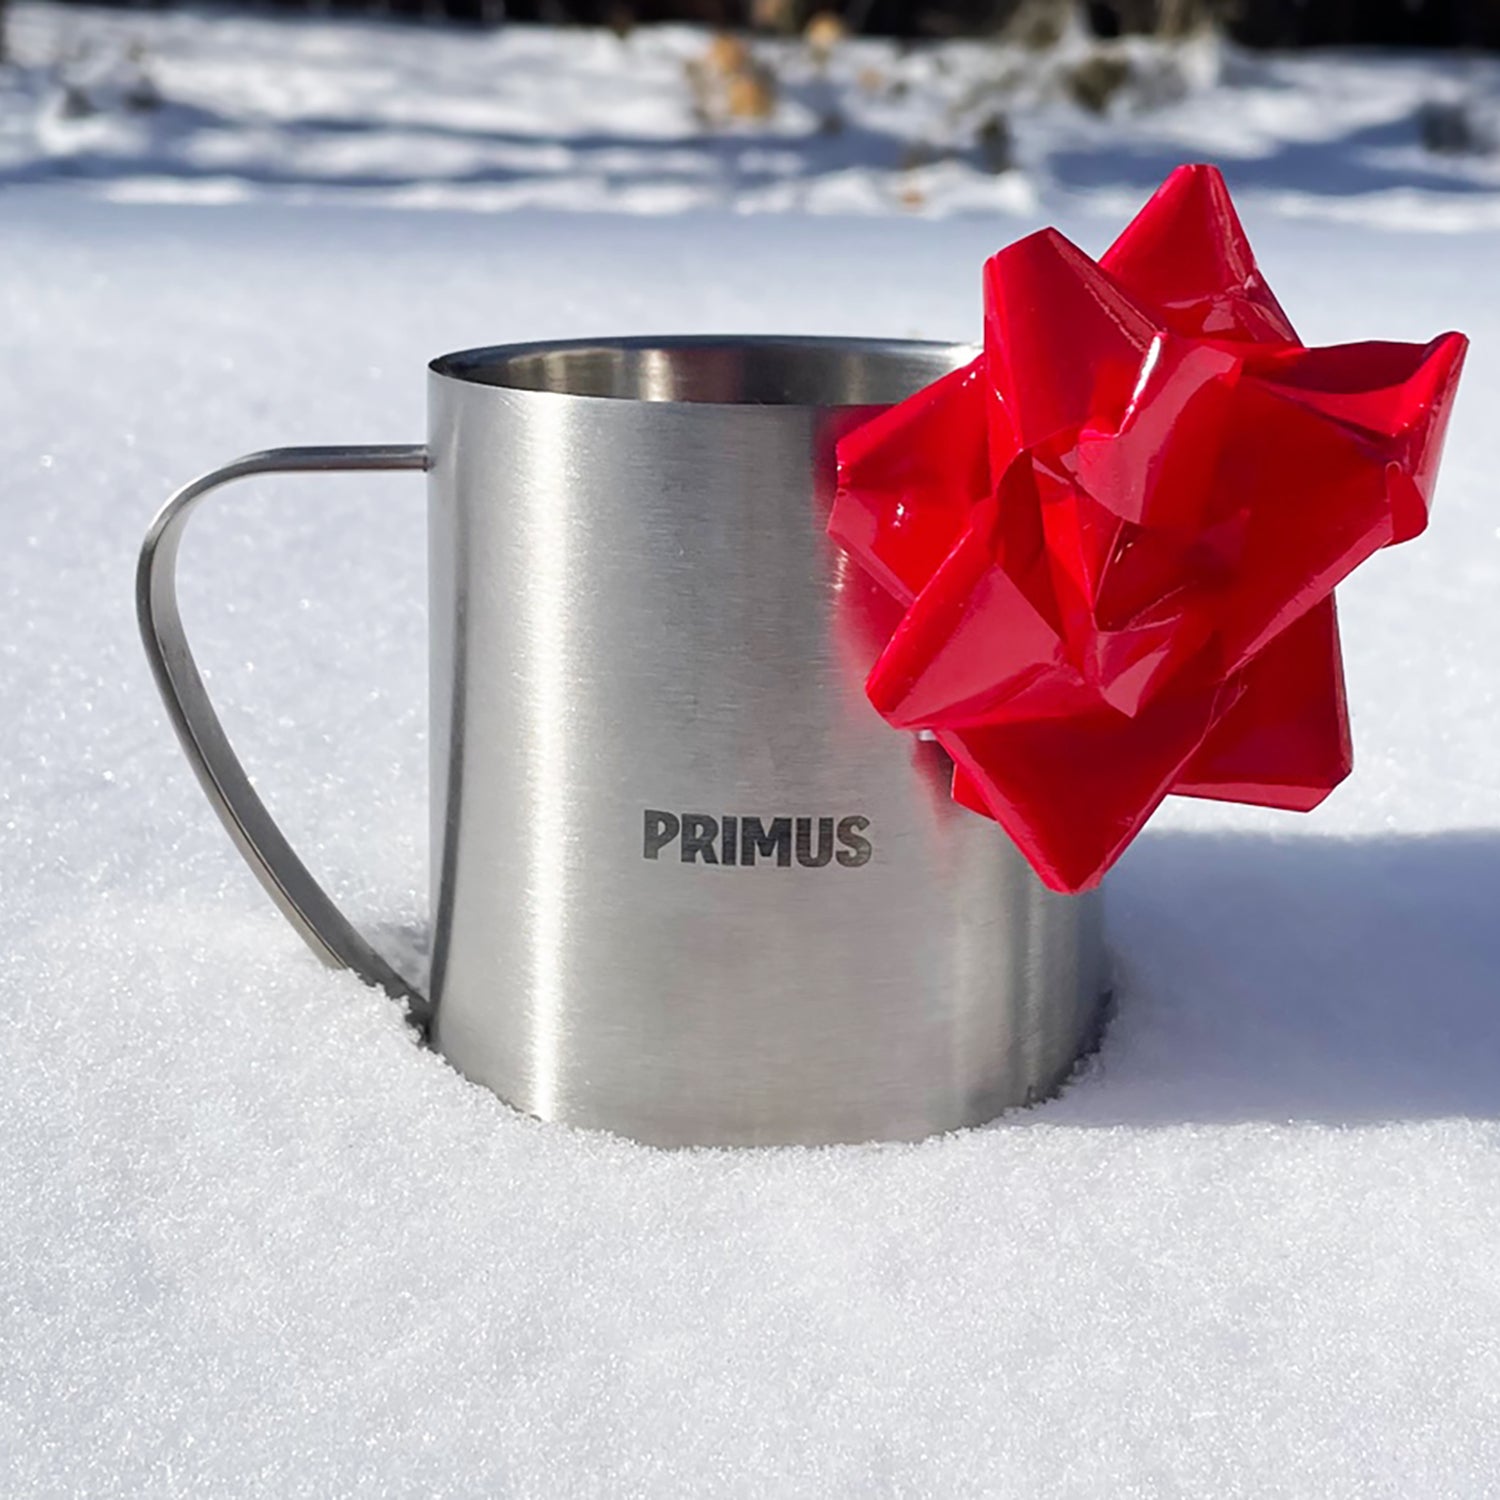 Why a Simple Camping Mug Is the Perfect Holiday Gift